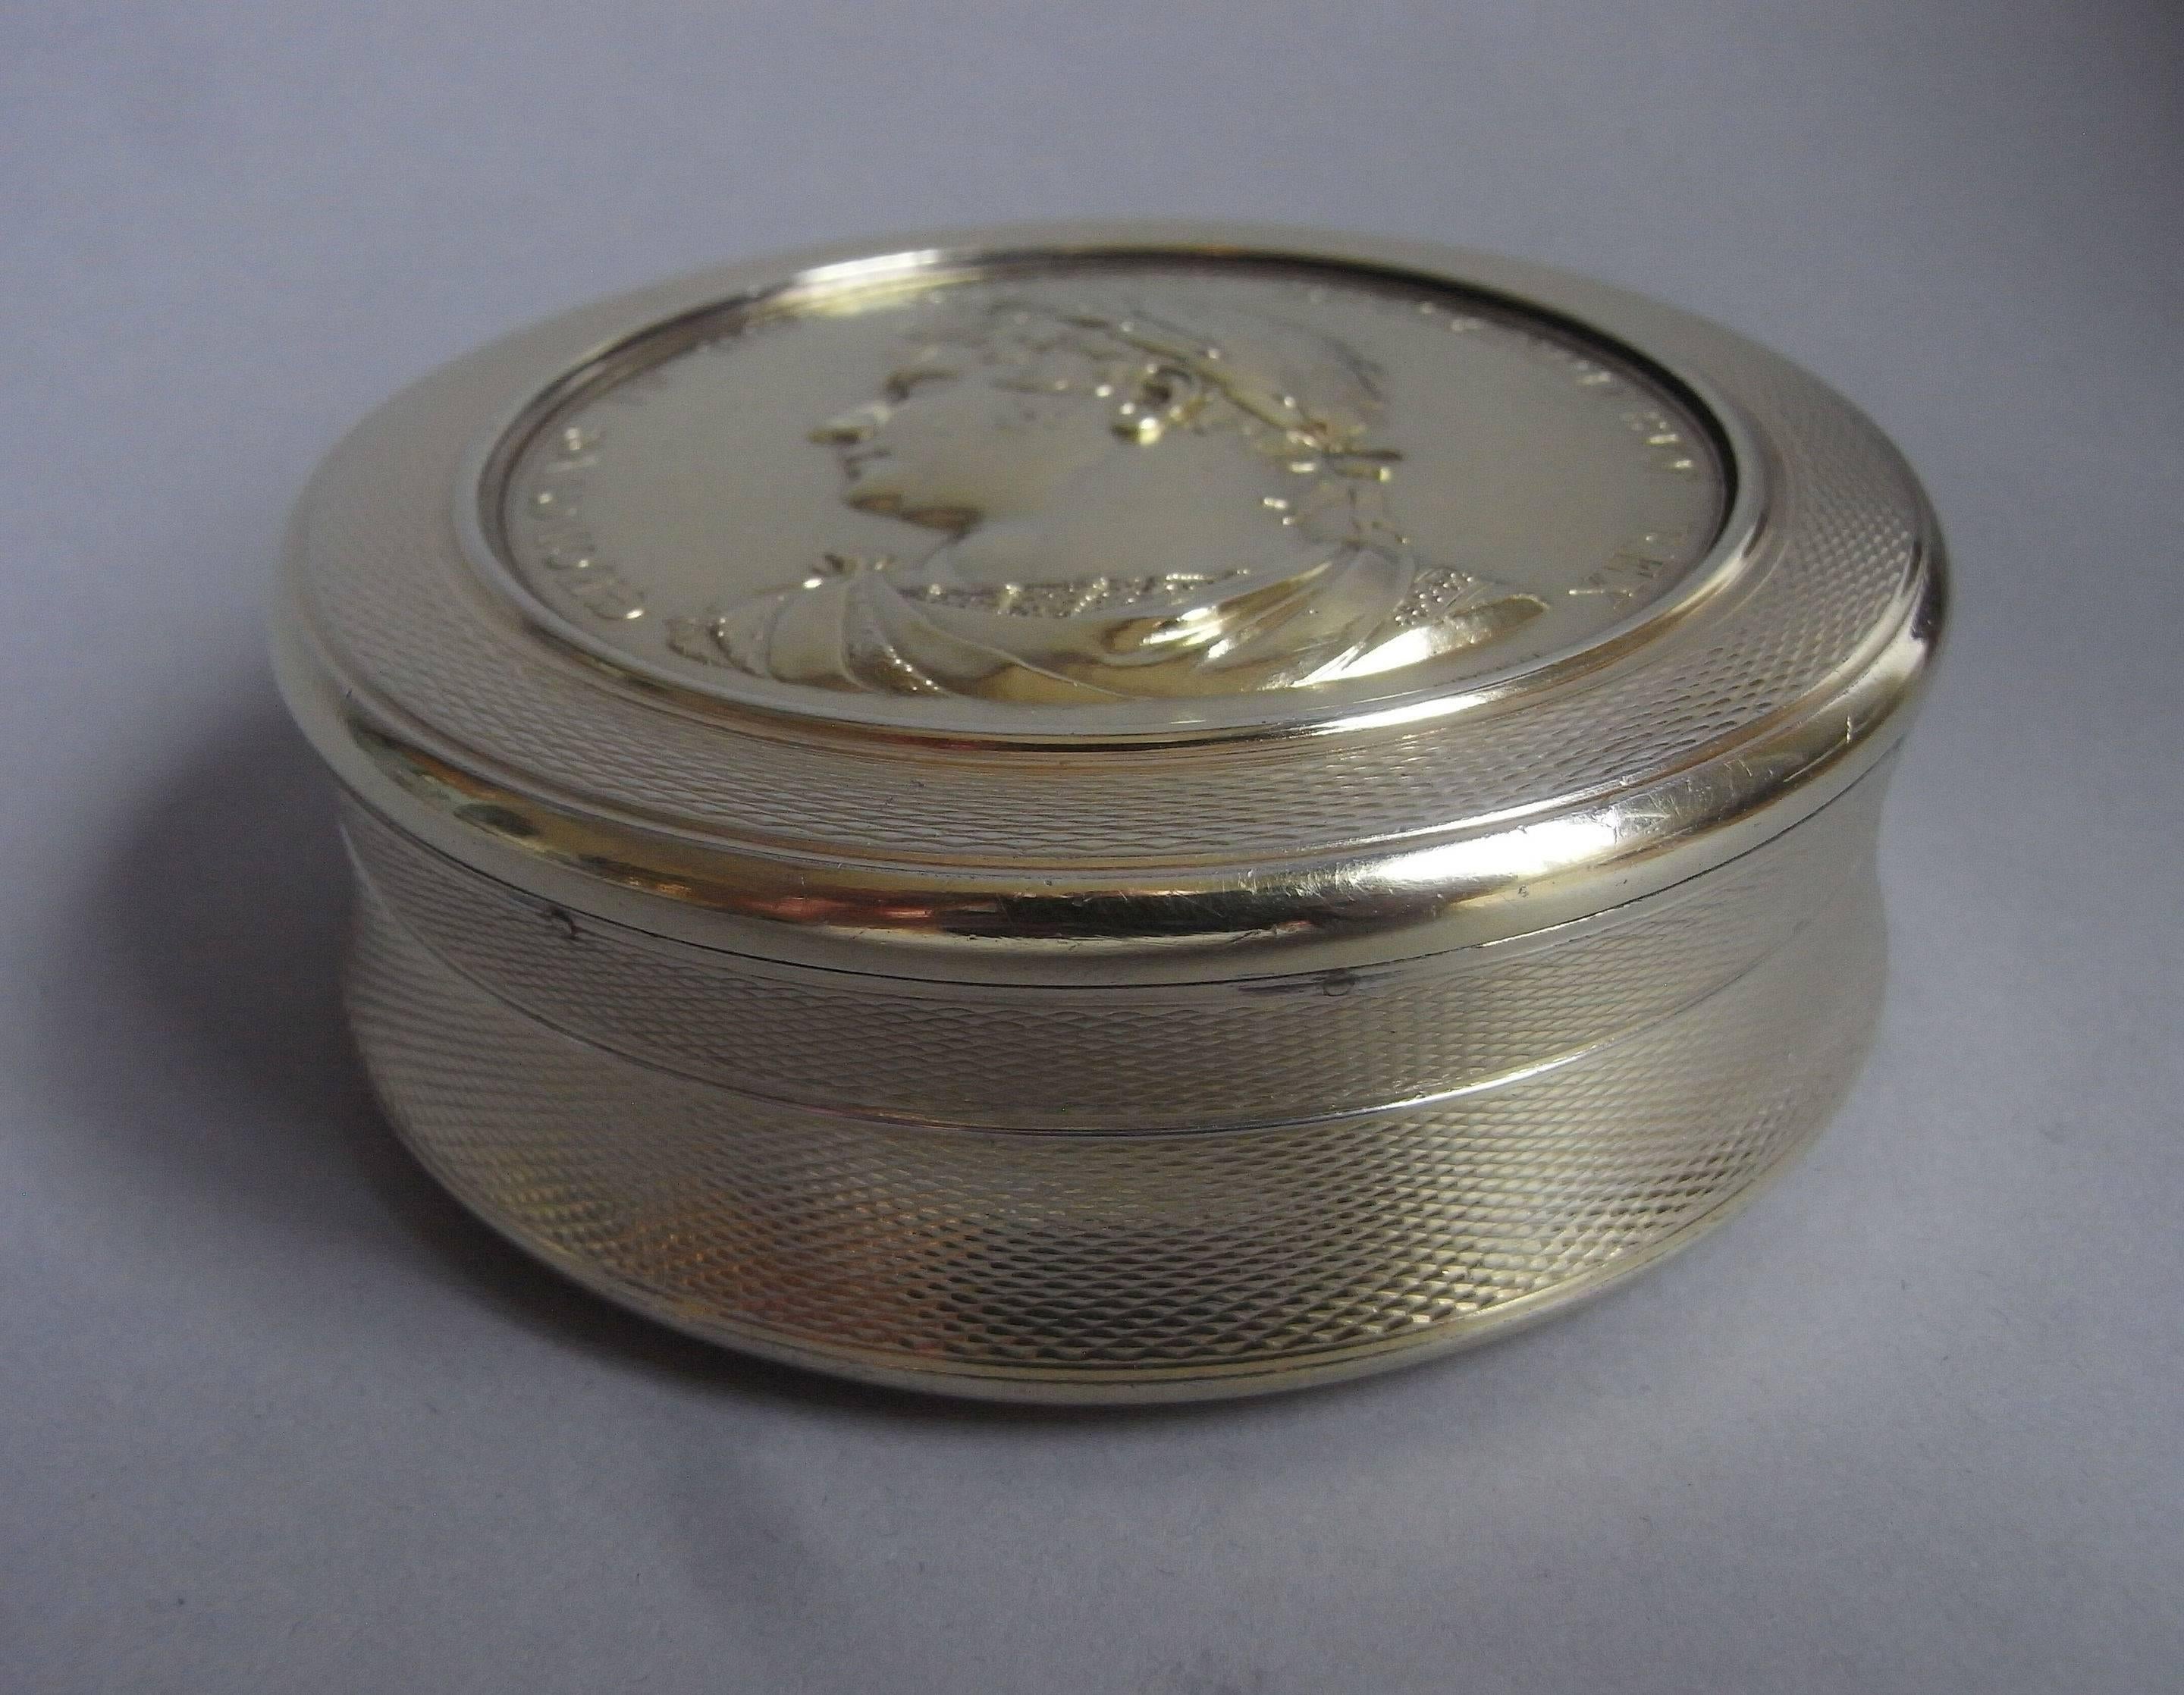 A highly important George IV silver gilt Coronation Box made in London in 1823 by the Royal Box maker, Alexander James Strachan.

The box has a deep circular form and is engraved with an engine turned frame on the cover and sides. The base is